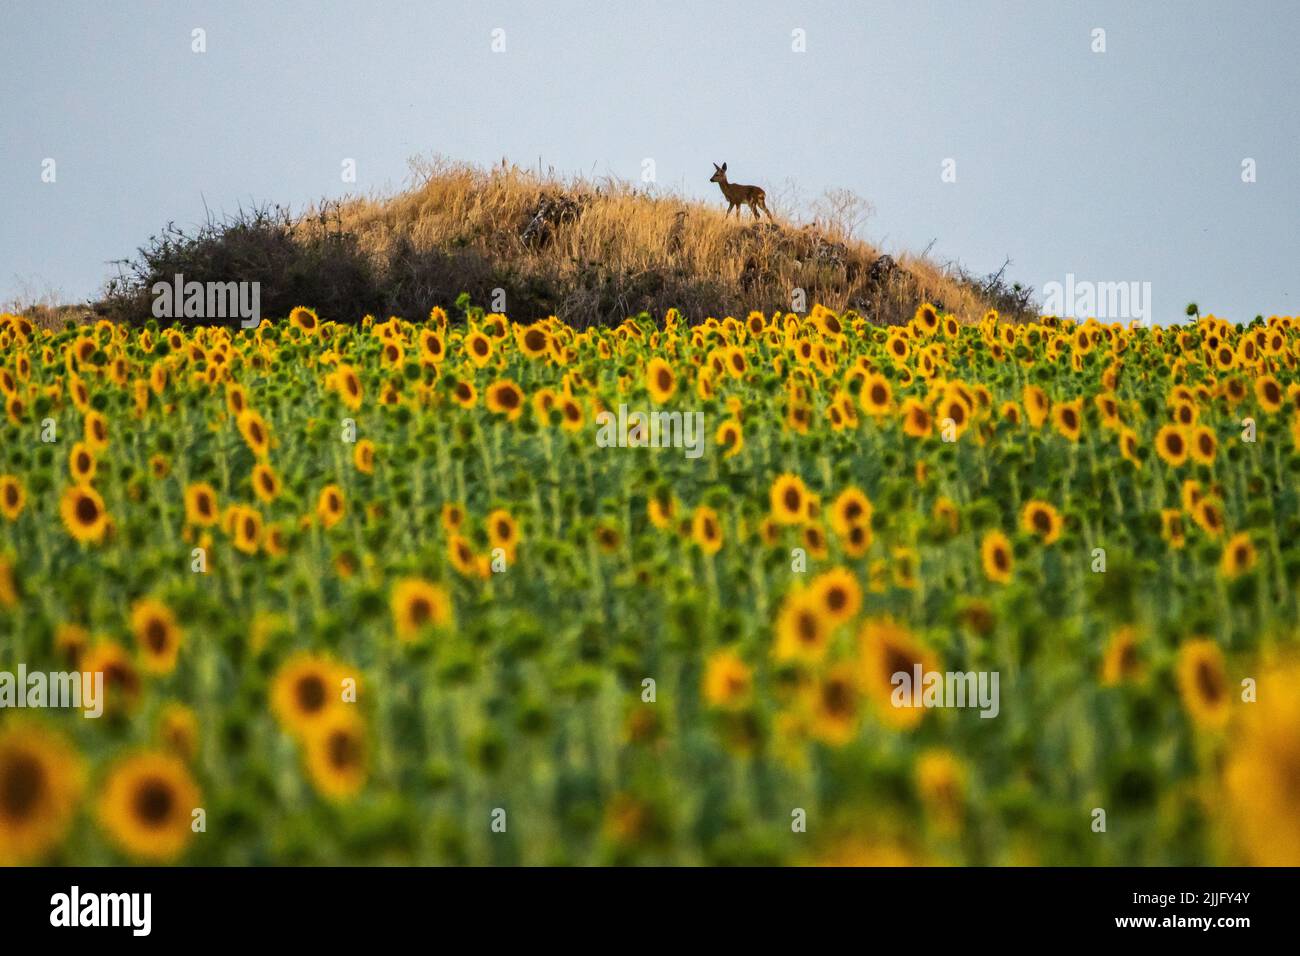 A roe deer is seen in a field of sunflowers during a summer day. Stock Photo